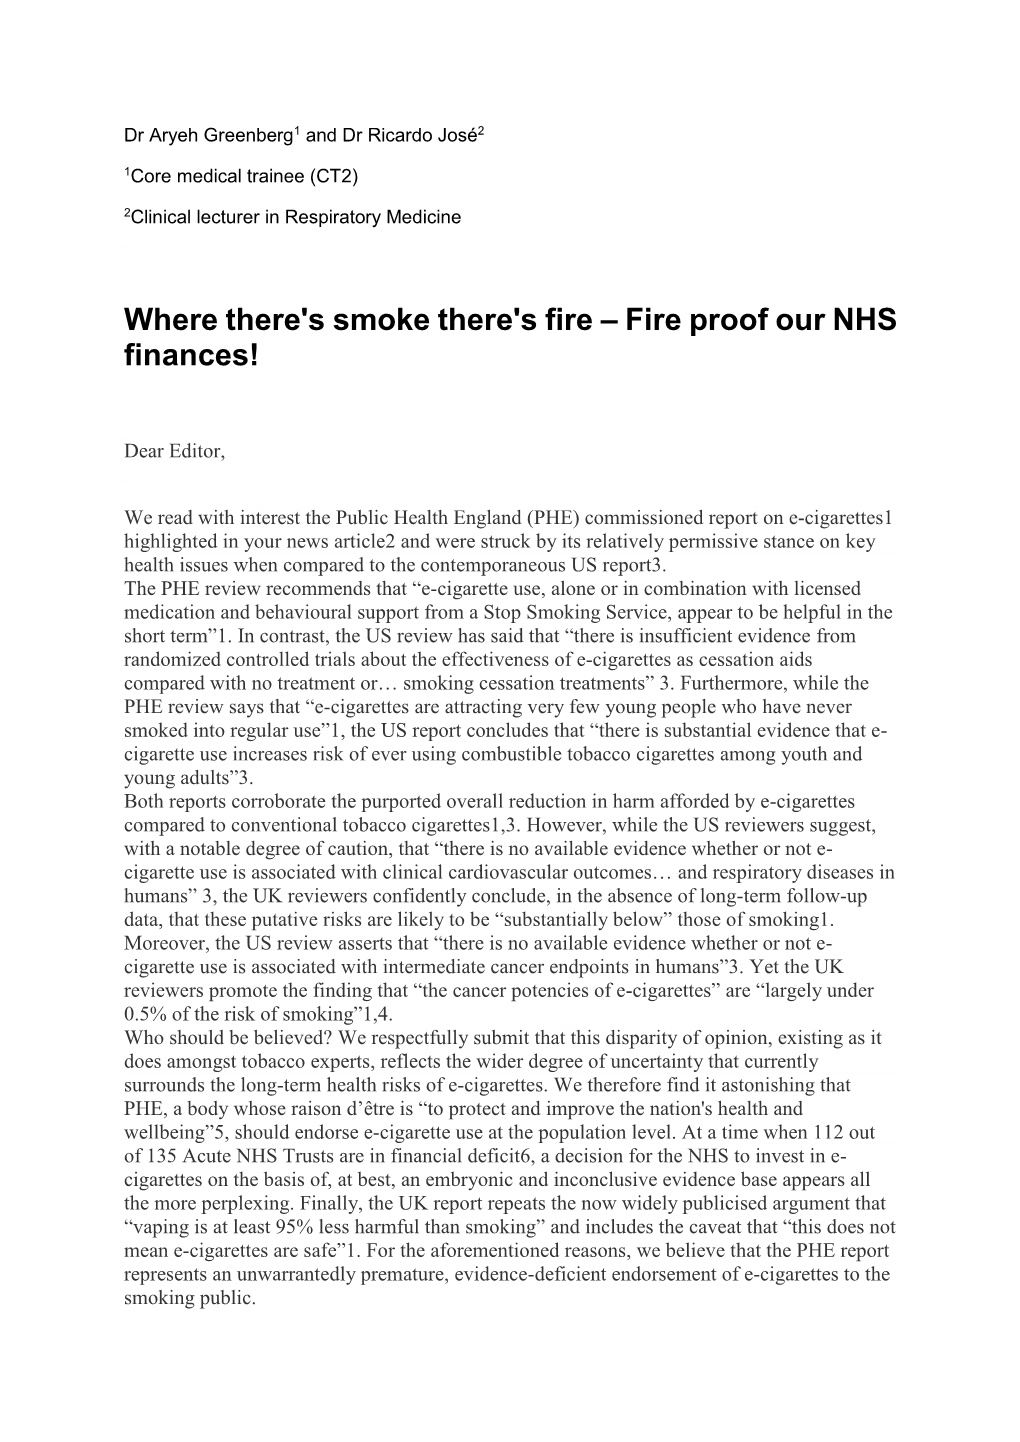 Fire Proof Our NHS Finances!